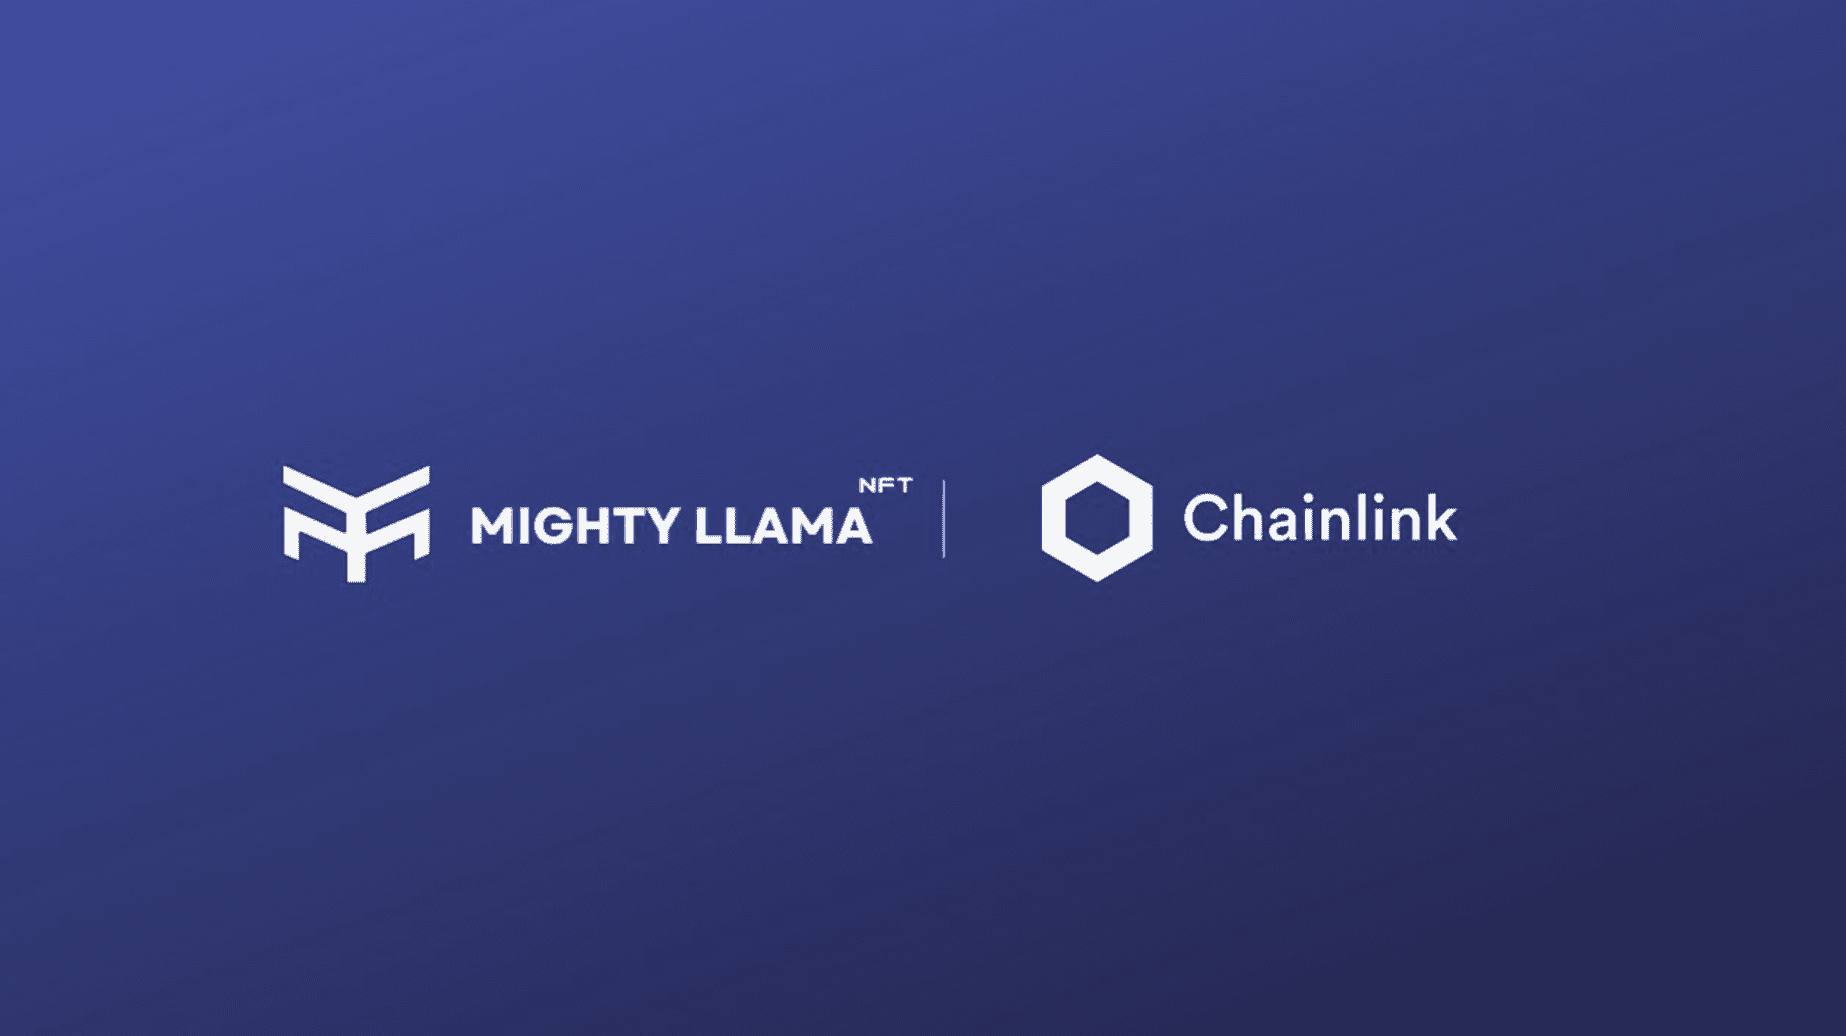 Mighty Llama Has Integrated Chainlink to Help Power Lucky Draw Games